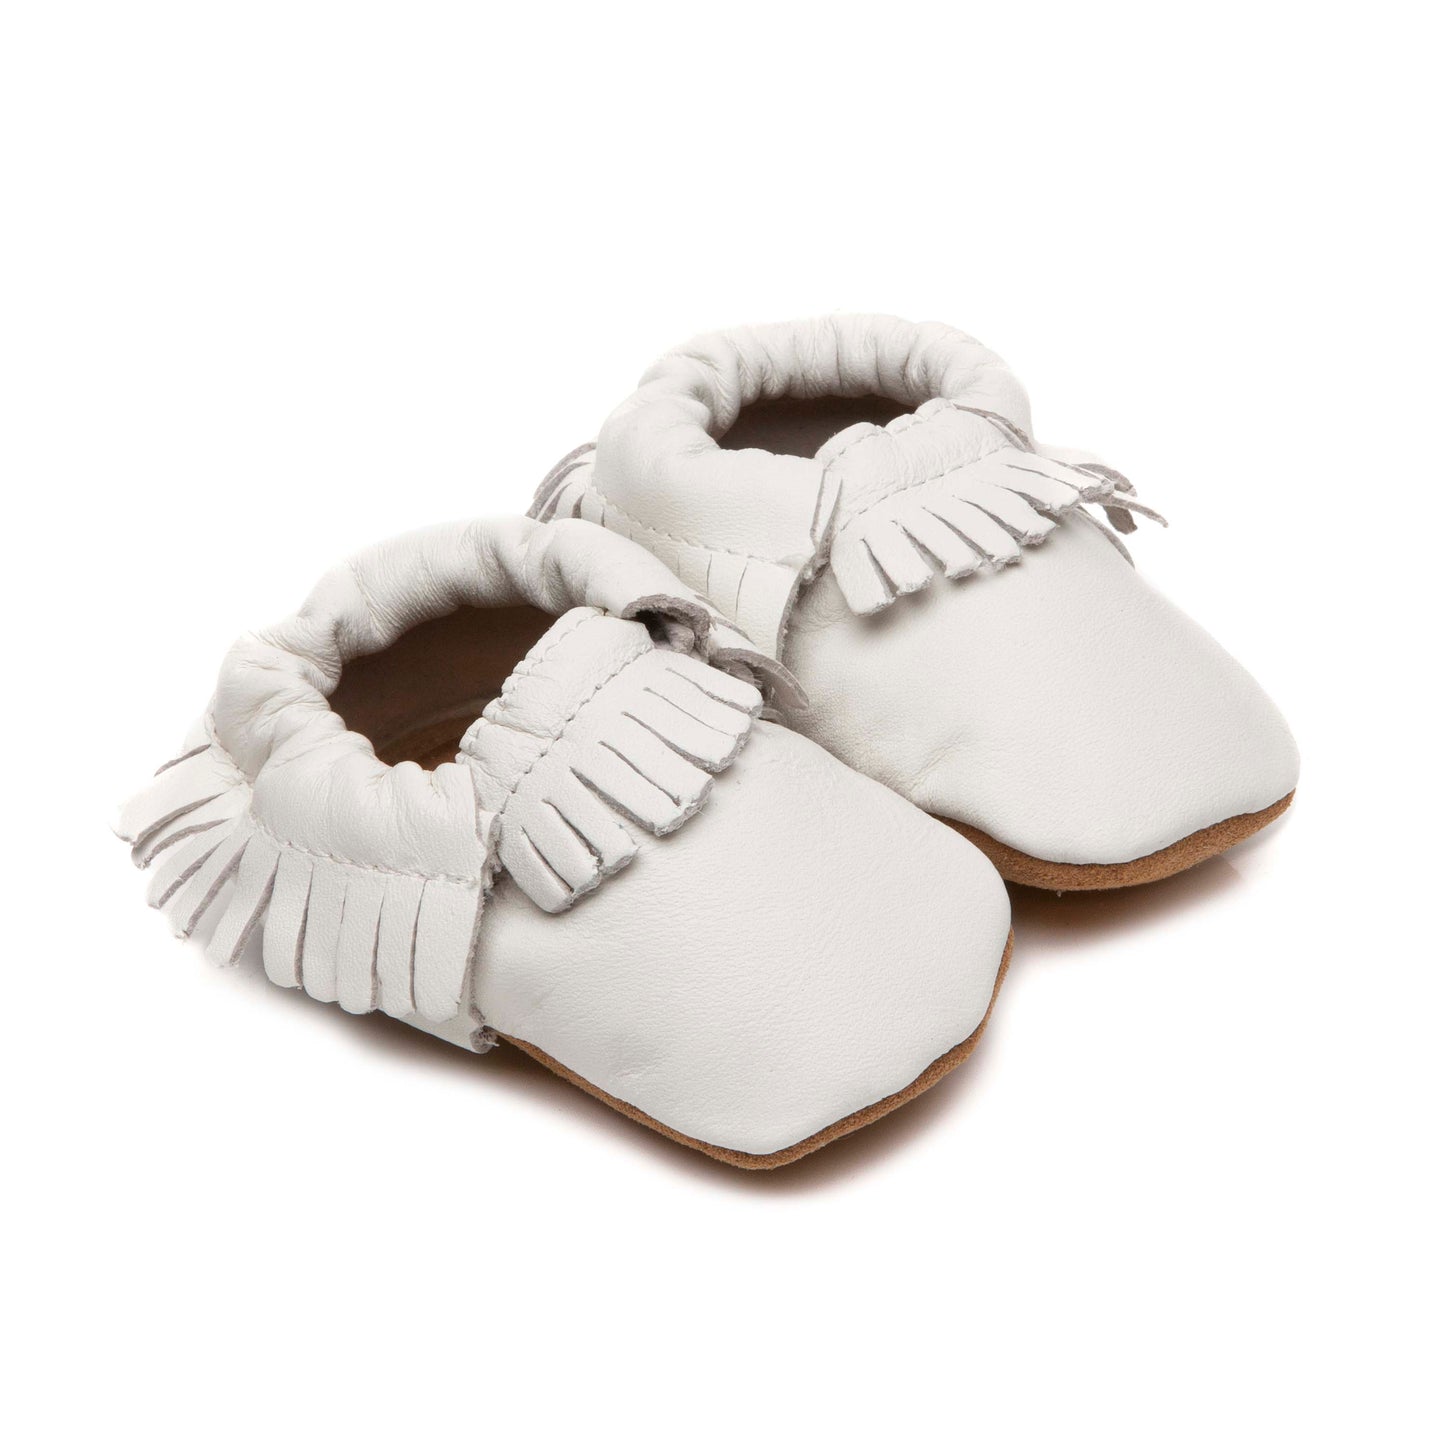 Moccasins Soft Baby Shoes White